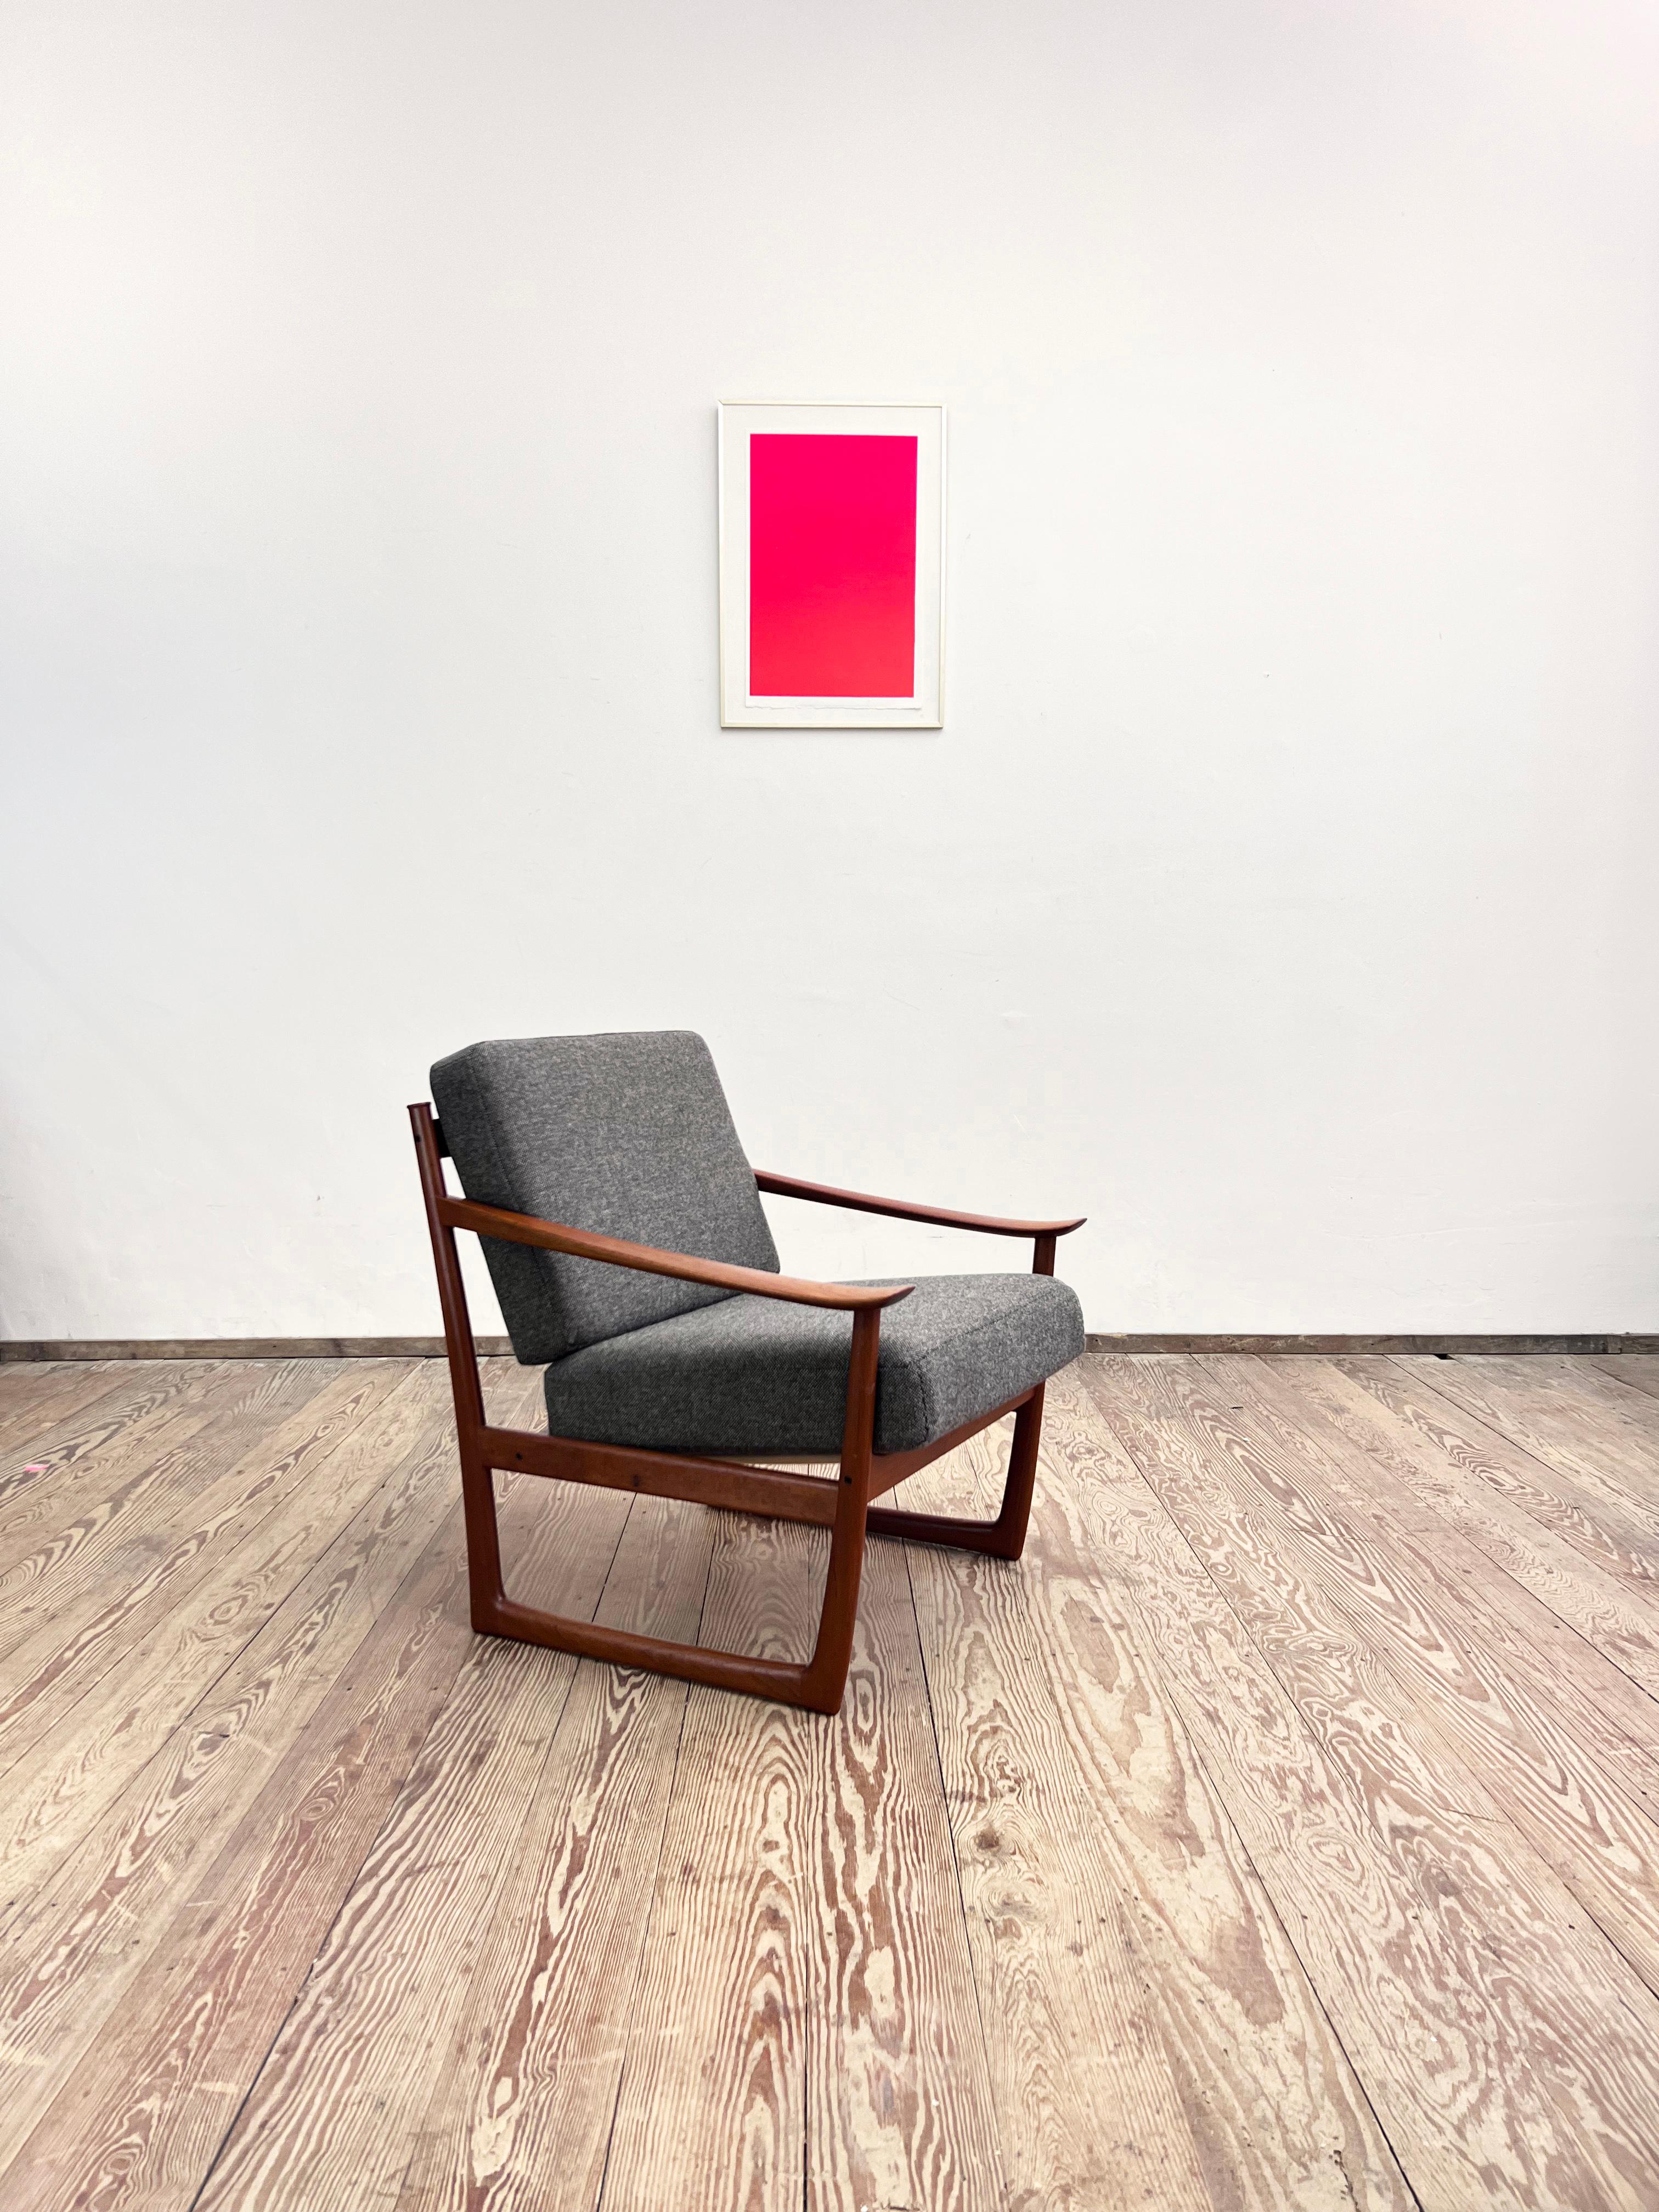 Dimensions: 62 x 76 x 76 cm (Width x Height x Depth)

This exquisite lounge chair, model FD 130, exemplifies the essence of Scandinavian design, created by Peter Hvidt und Orla Mølgaard Nielsen, and crafted by France and Son in the 1960s Denmark.